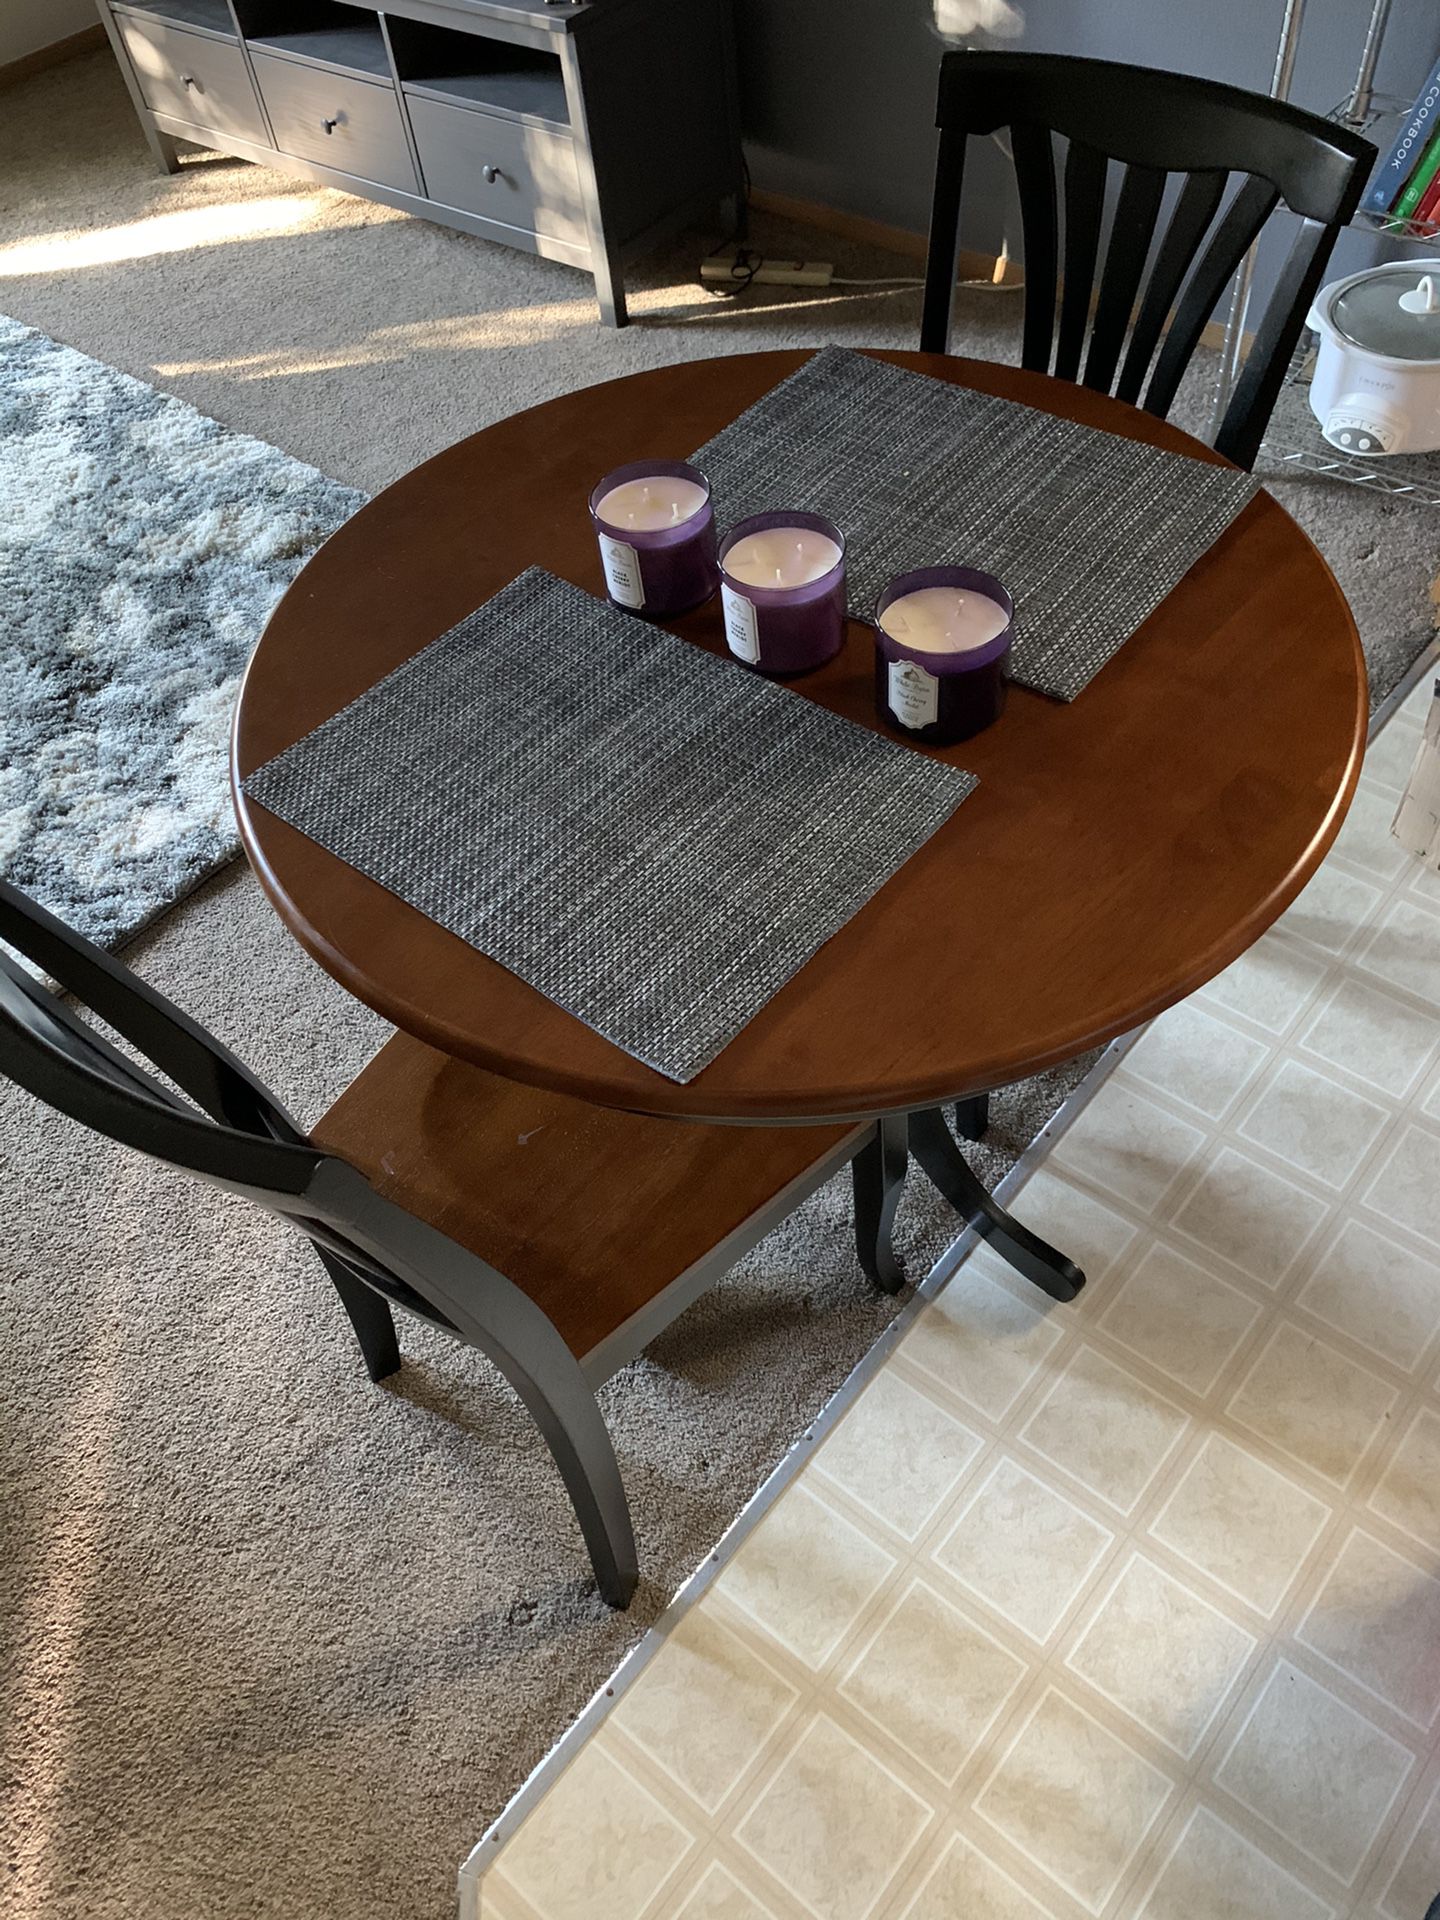 Small kitchen table 36” round with two chairs